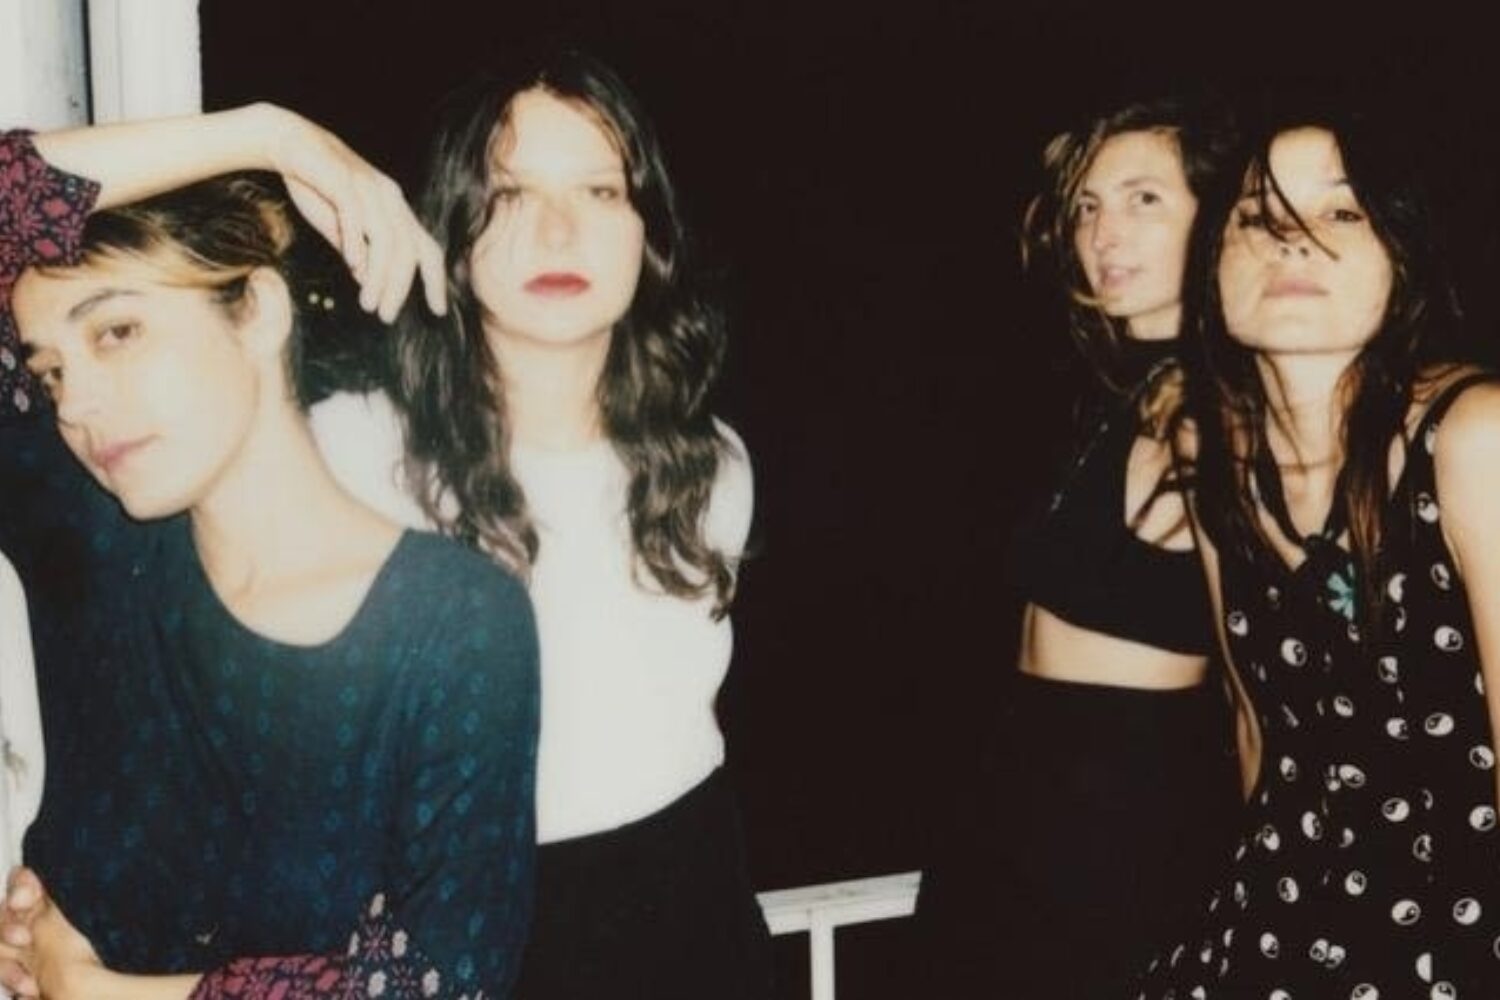 Warpaint share Gang of Four cover, 'Paralysed' | News | DIY